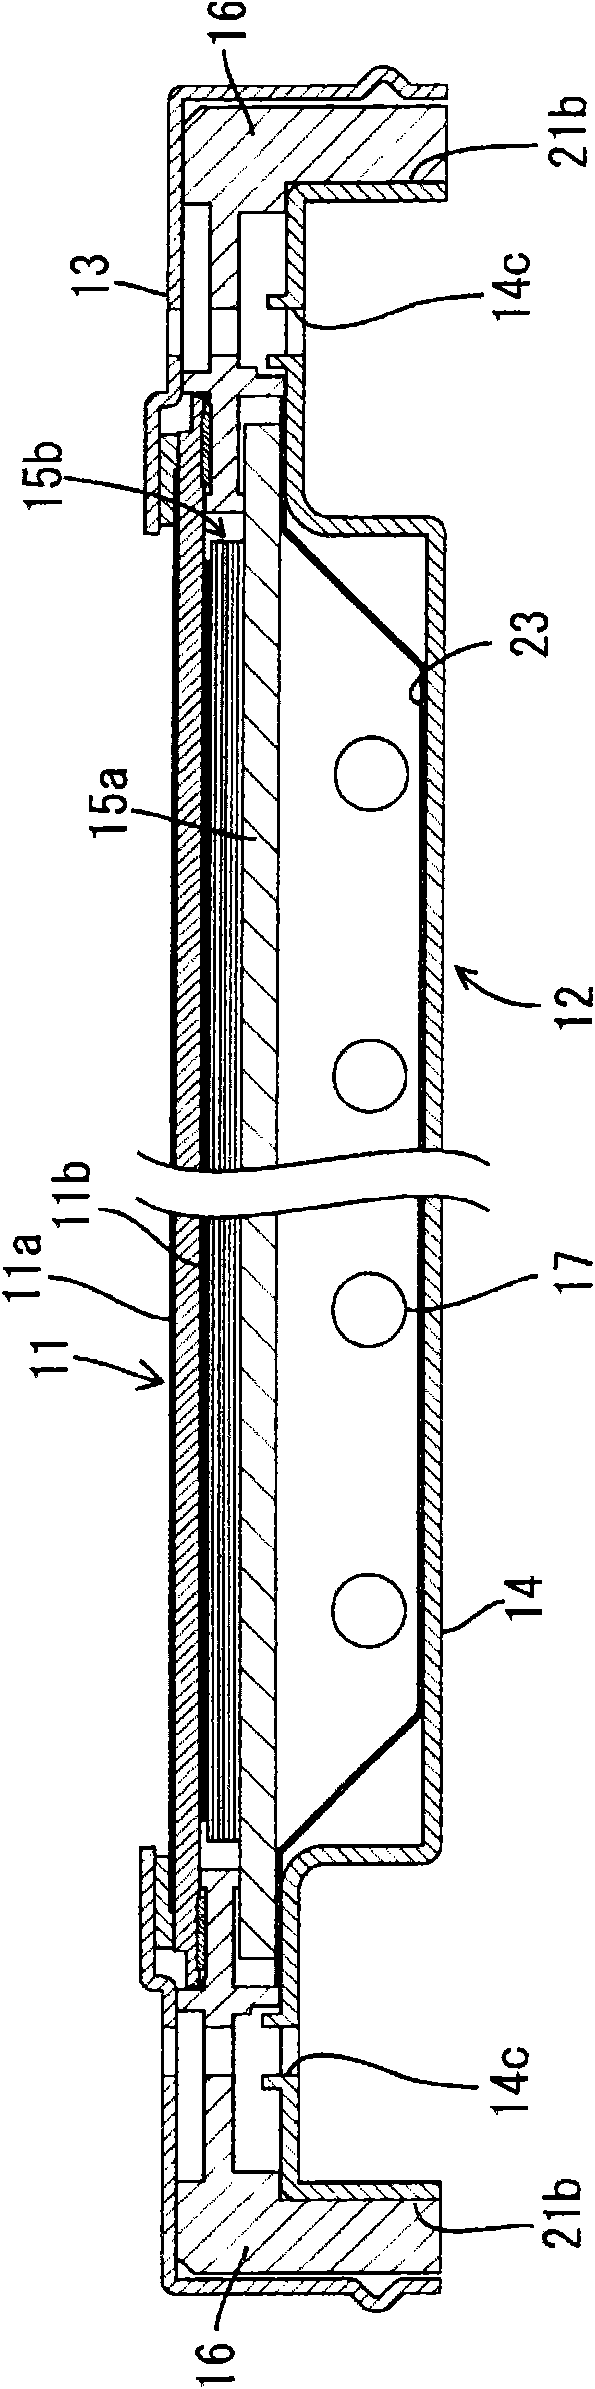 Lamp holder, illuminating device, display device and television receiving device